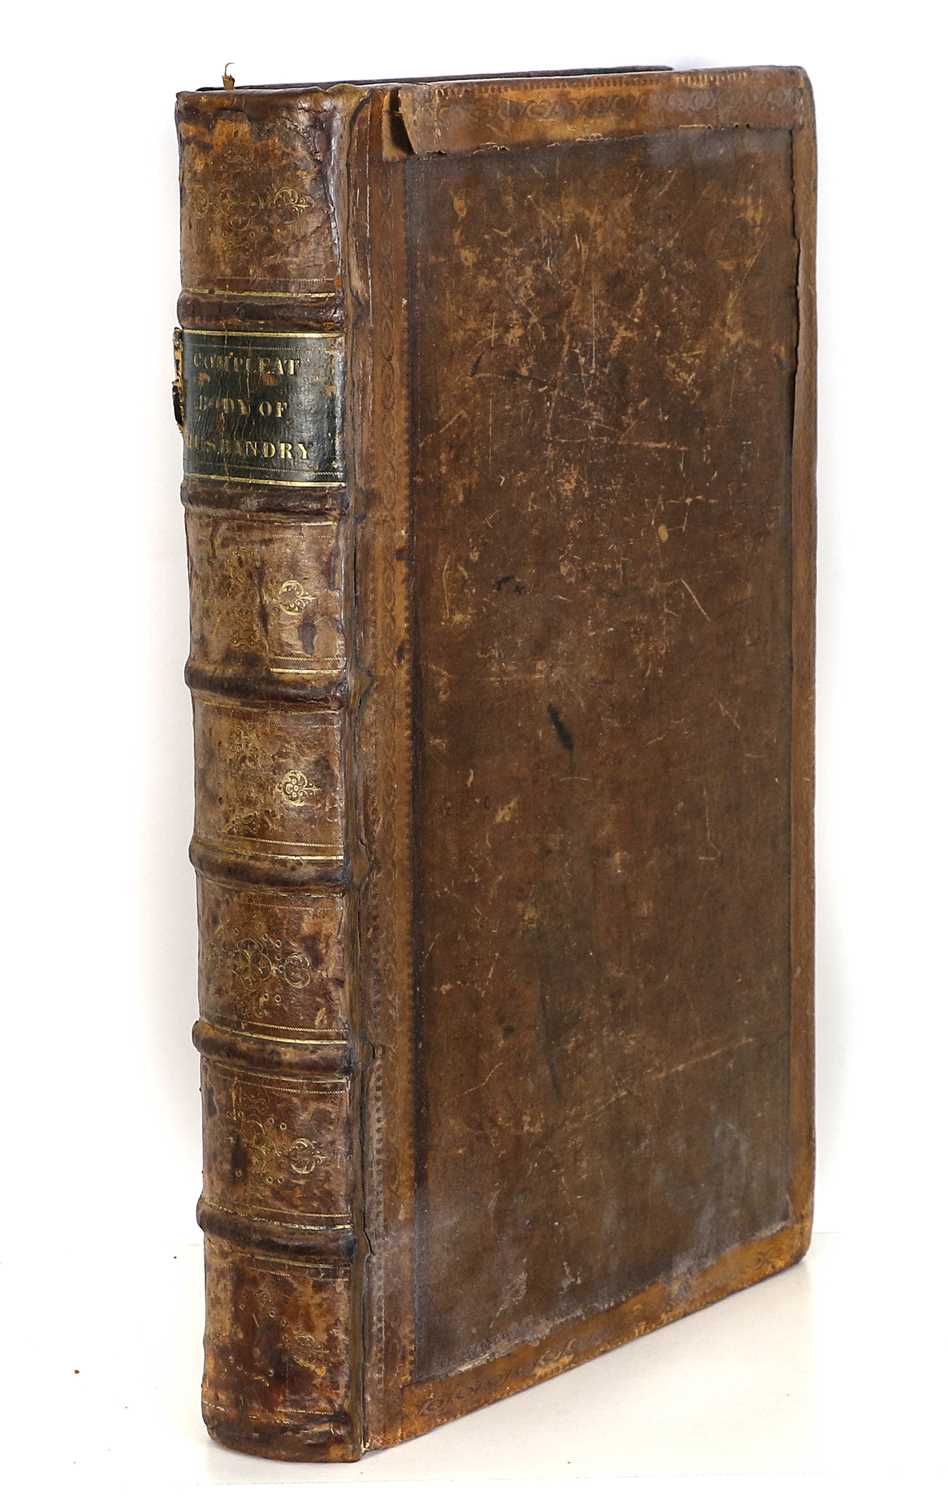 Lot 73 - HALE (Thomas) A Compleat Body of Husbandry,...